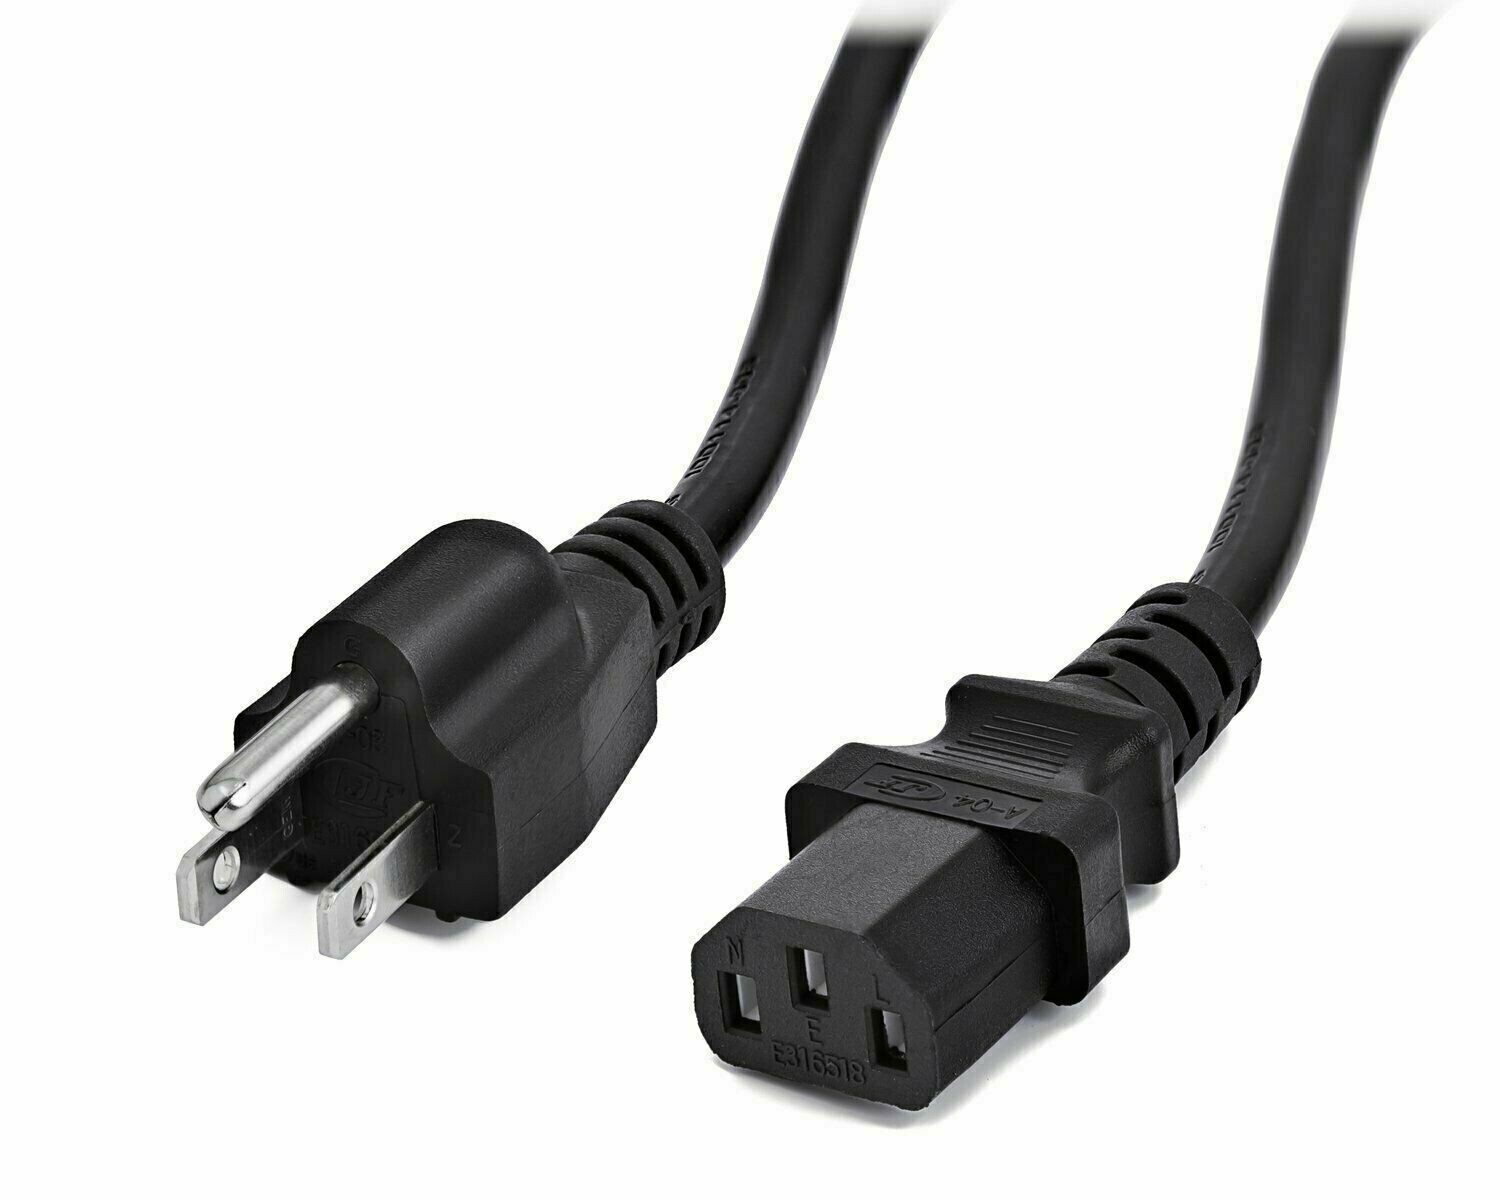 Replacement AC Wall Power Cord for LCD COMPUTER MONITOR PS3- 6 & 10 Feet 3 Prong